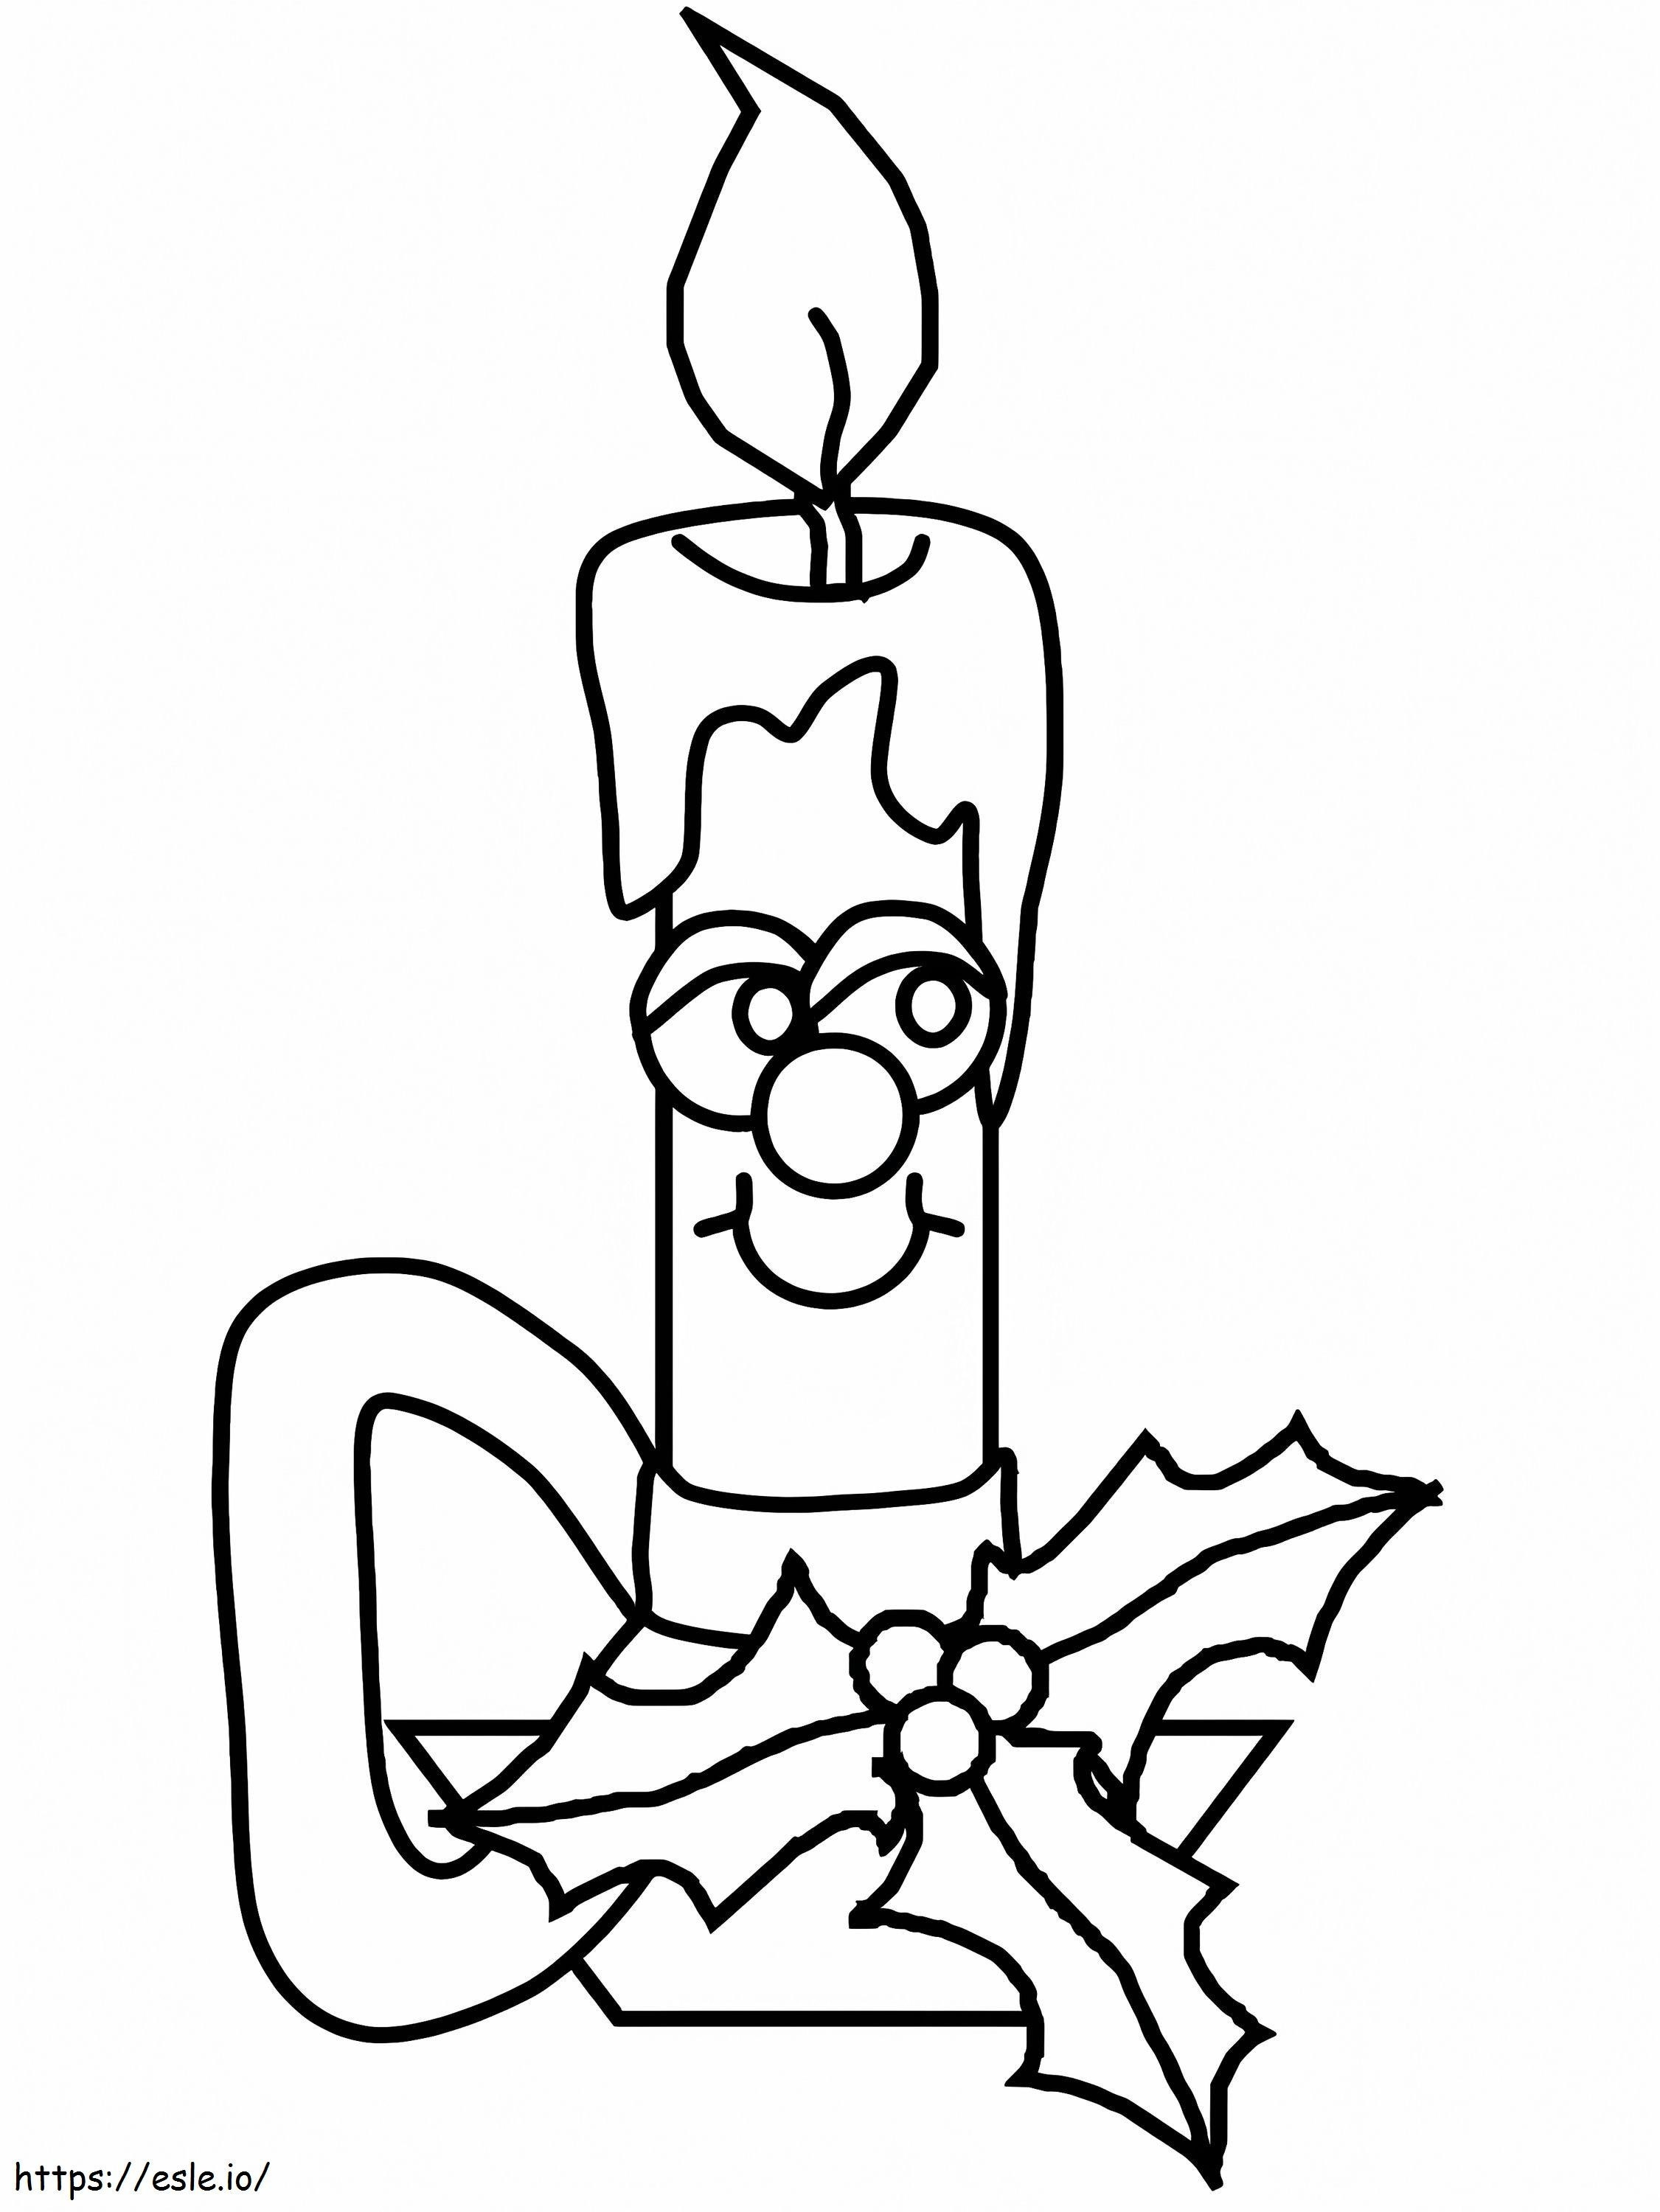 Cute Christmas Candles coloring page